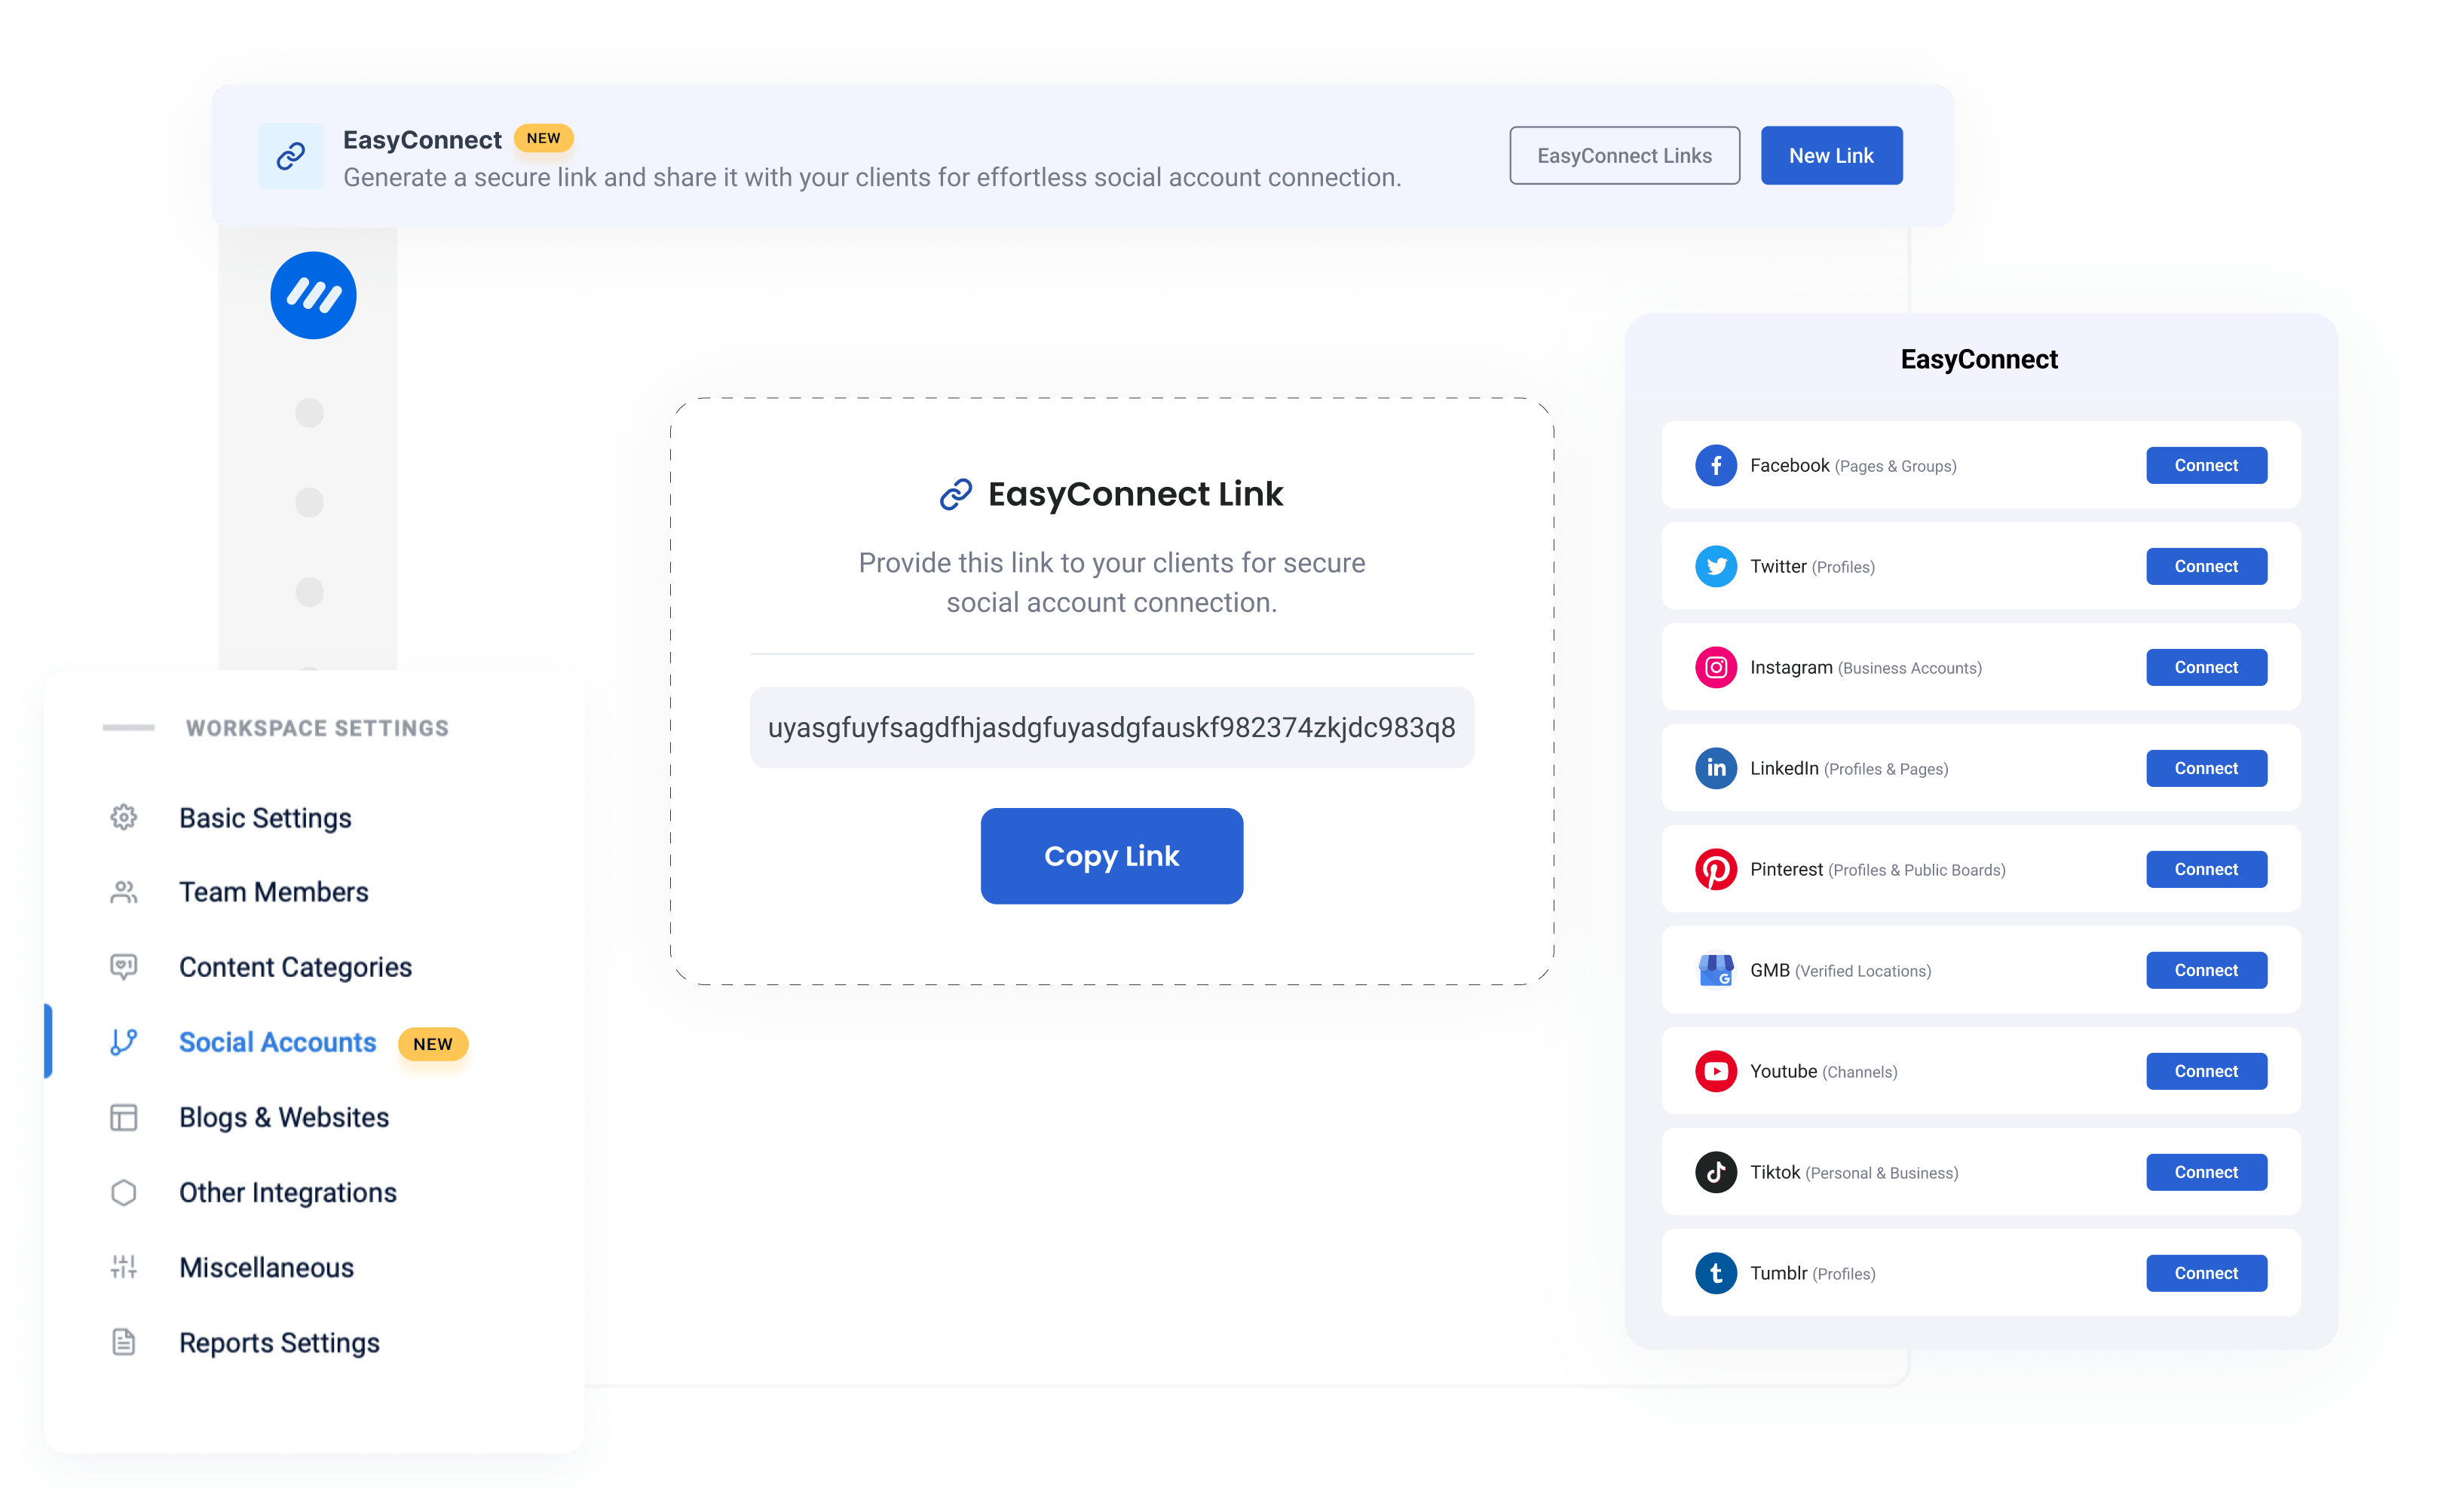 Connect with Easyconnect